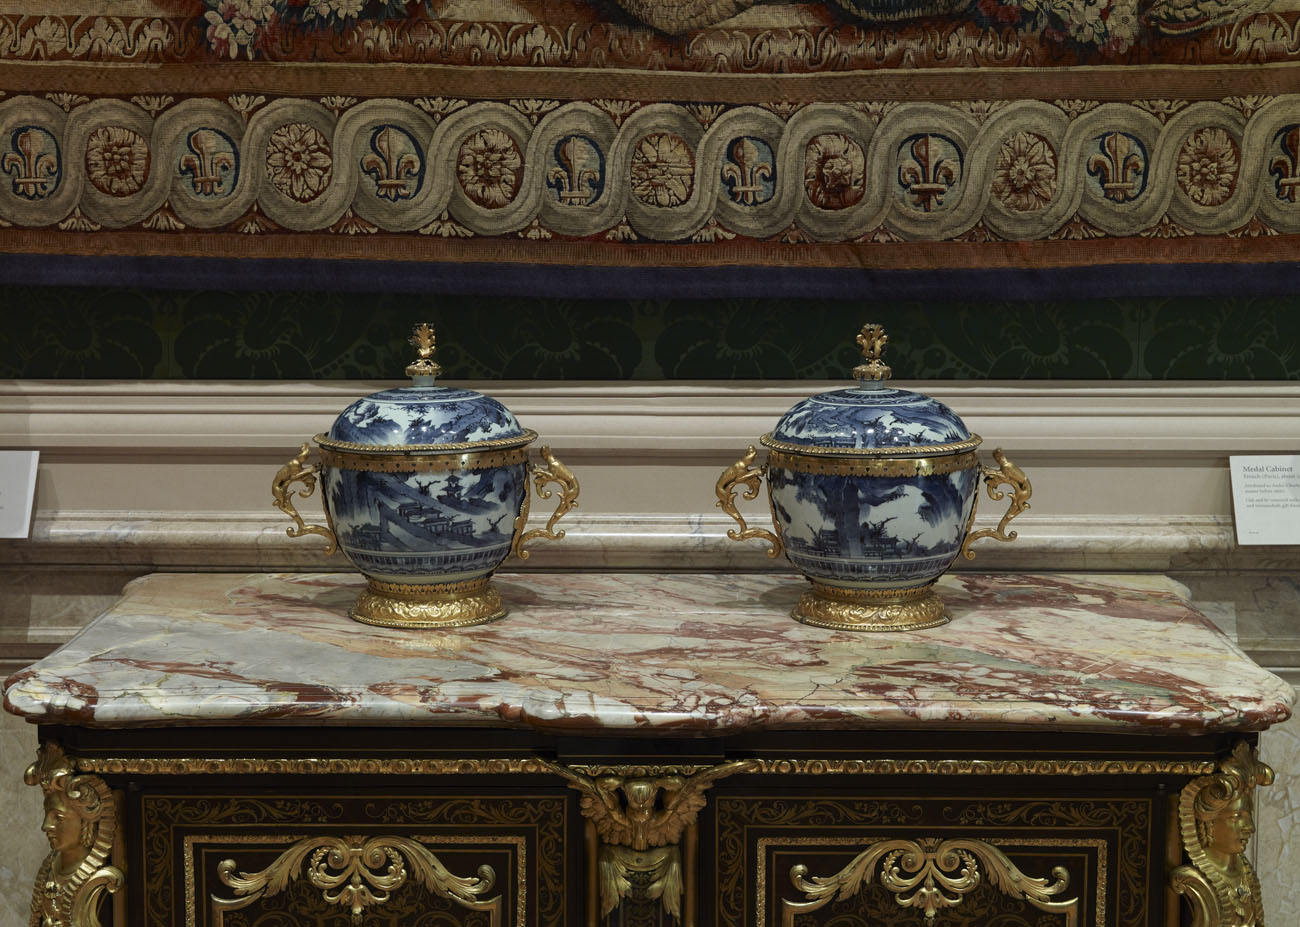 Pair of lidded and mounted bowls (on display at the J. Paul Getty Museum at the Getty Center in 2012), late seventeenth century. Japanese porcelain and English gilt-bronze mounts, each 13 9/16 x 15 x 10 1/16 in. The J. Paul Getty Museum, 85.DI.178